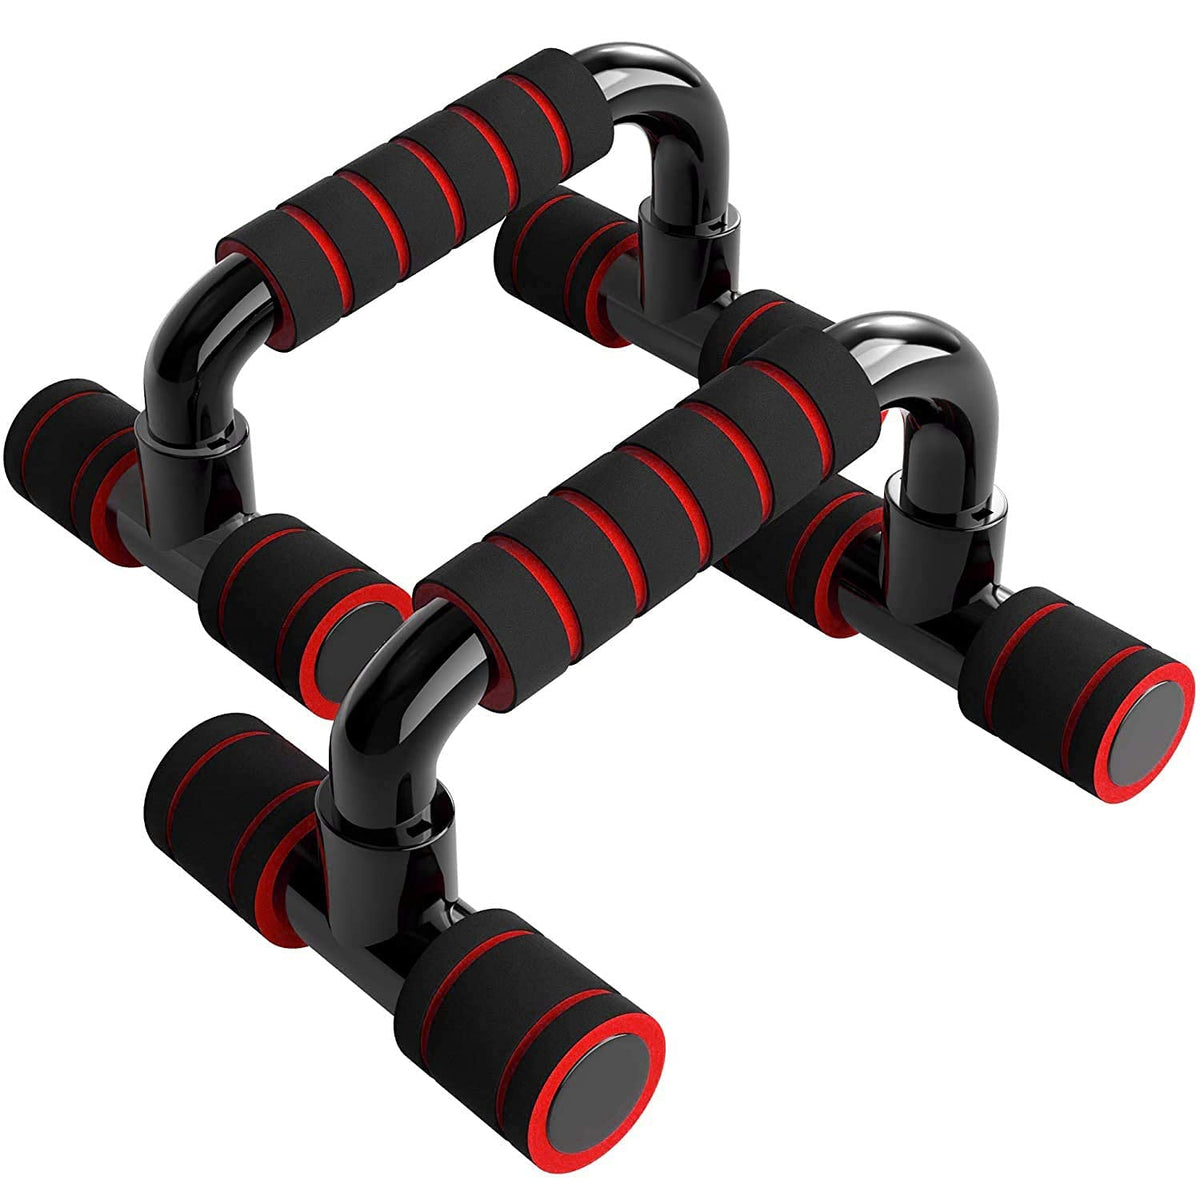 Strauss Moto Push-Up Bar, Pair | Comes with Premium Foam Grip & PVC Bracket for Non-Slip & Sturdy Exercise at Home or Gym (Red)